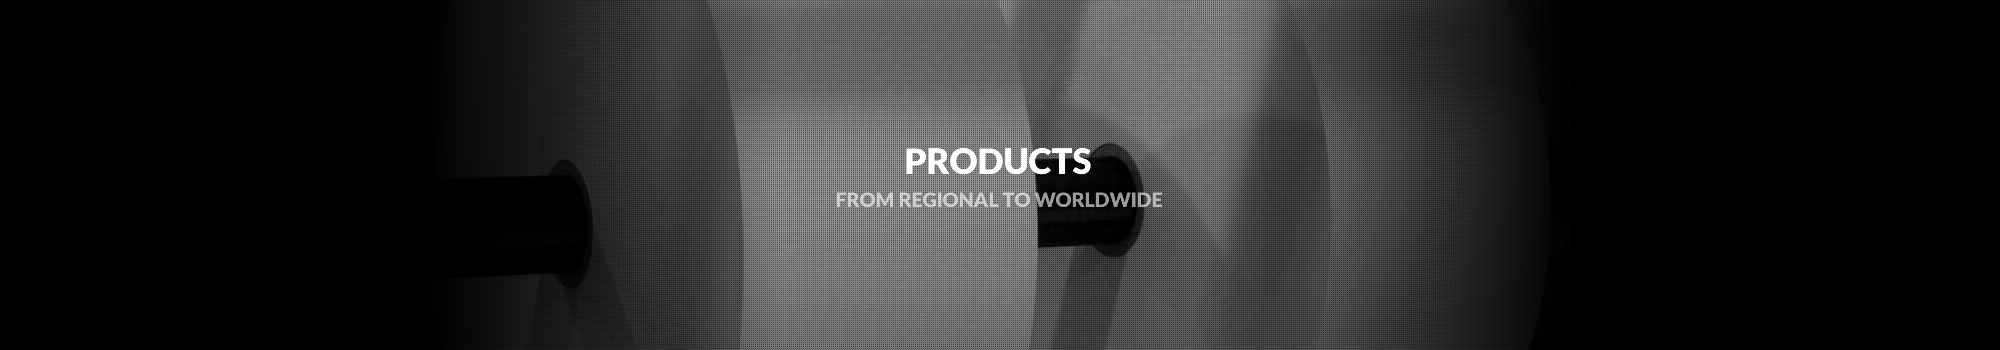 products banner